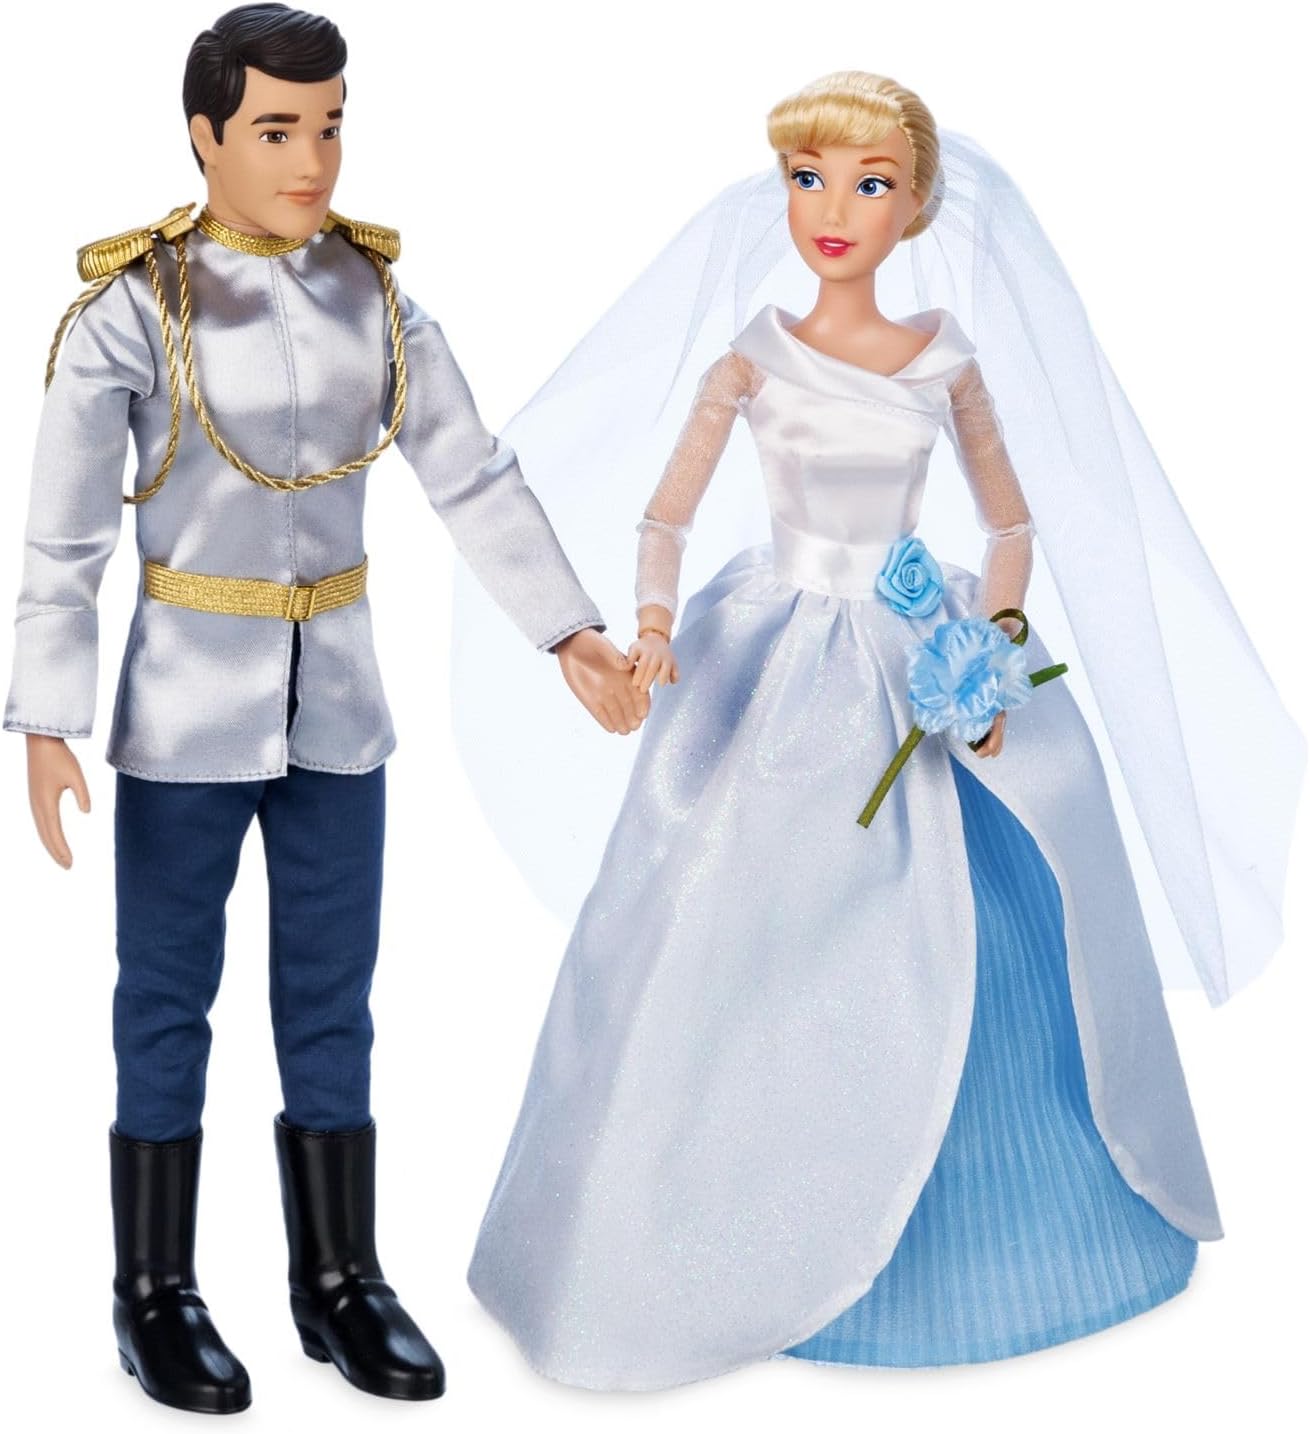 Disney Store new wedding dolls sets: Cinderella and Prince Charming,  Rapunzel and Eugene, Tiana and Naveen and Ariel and Eric 